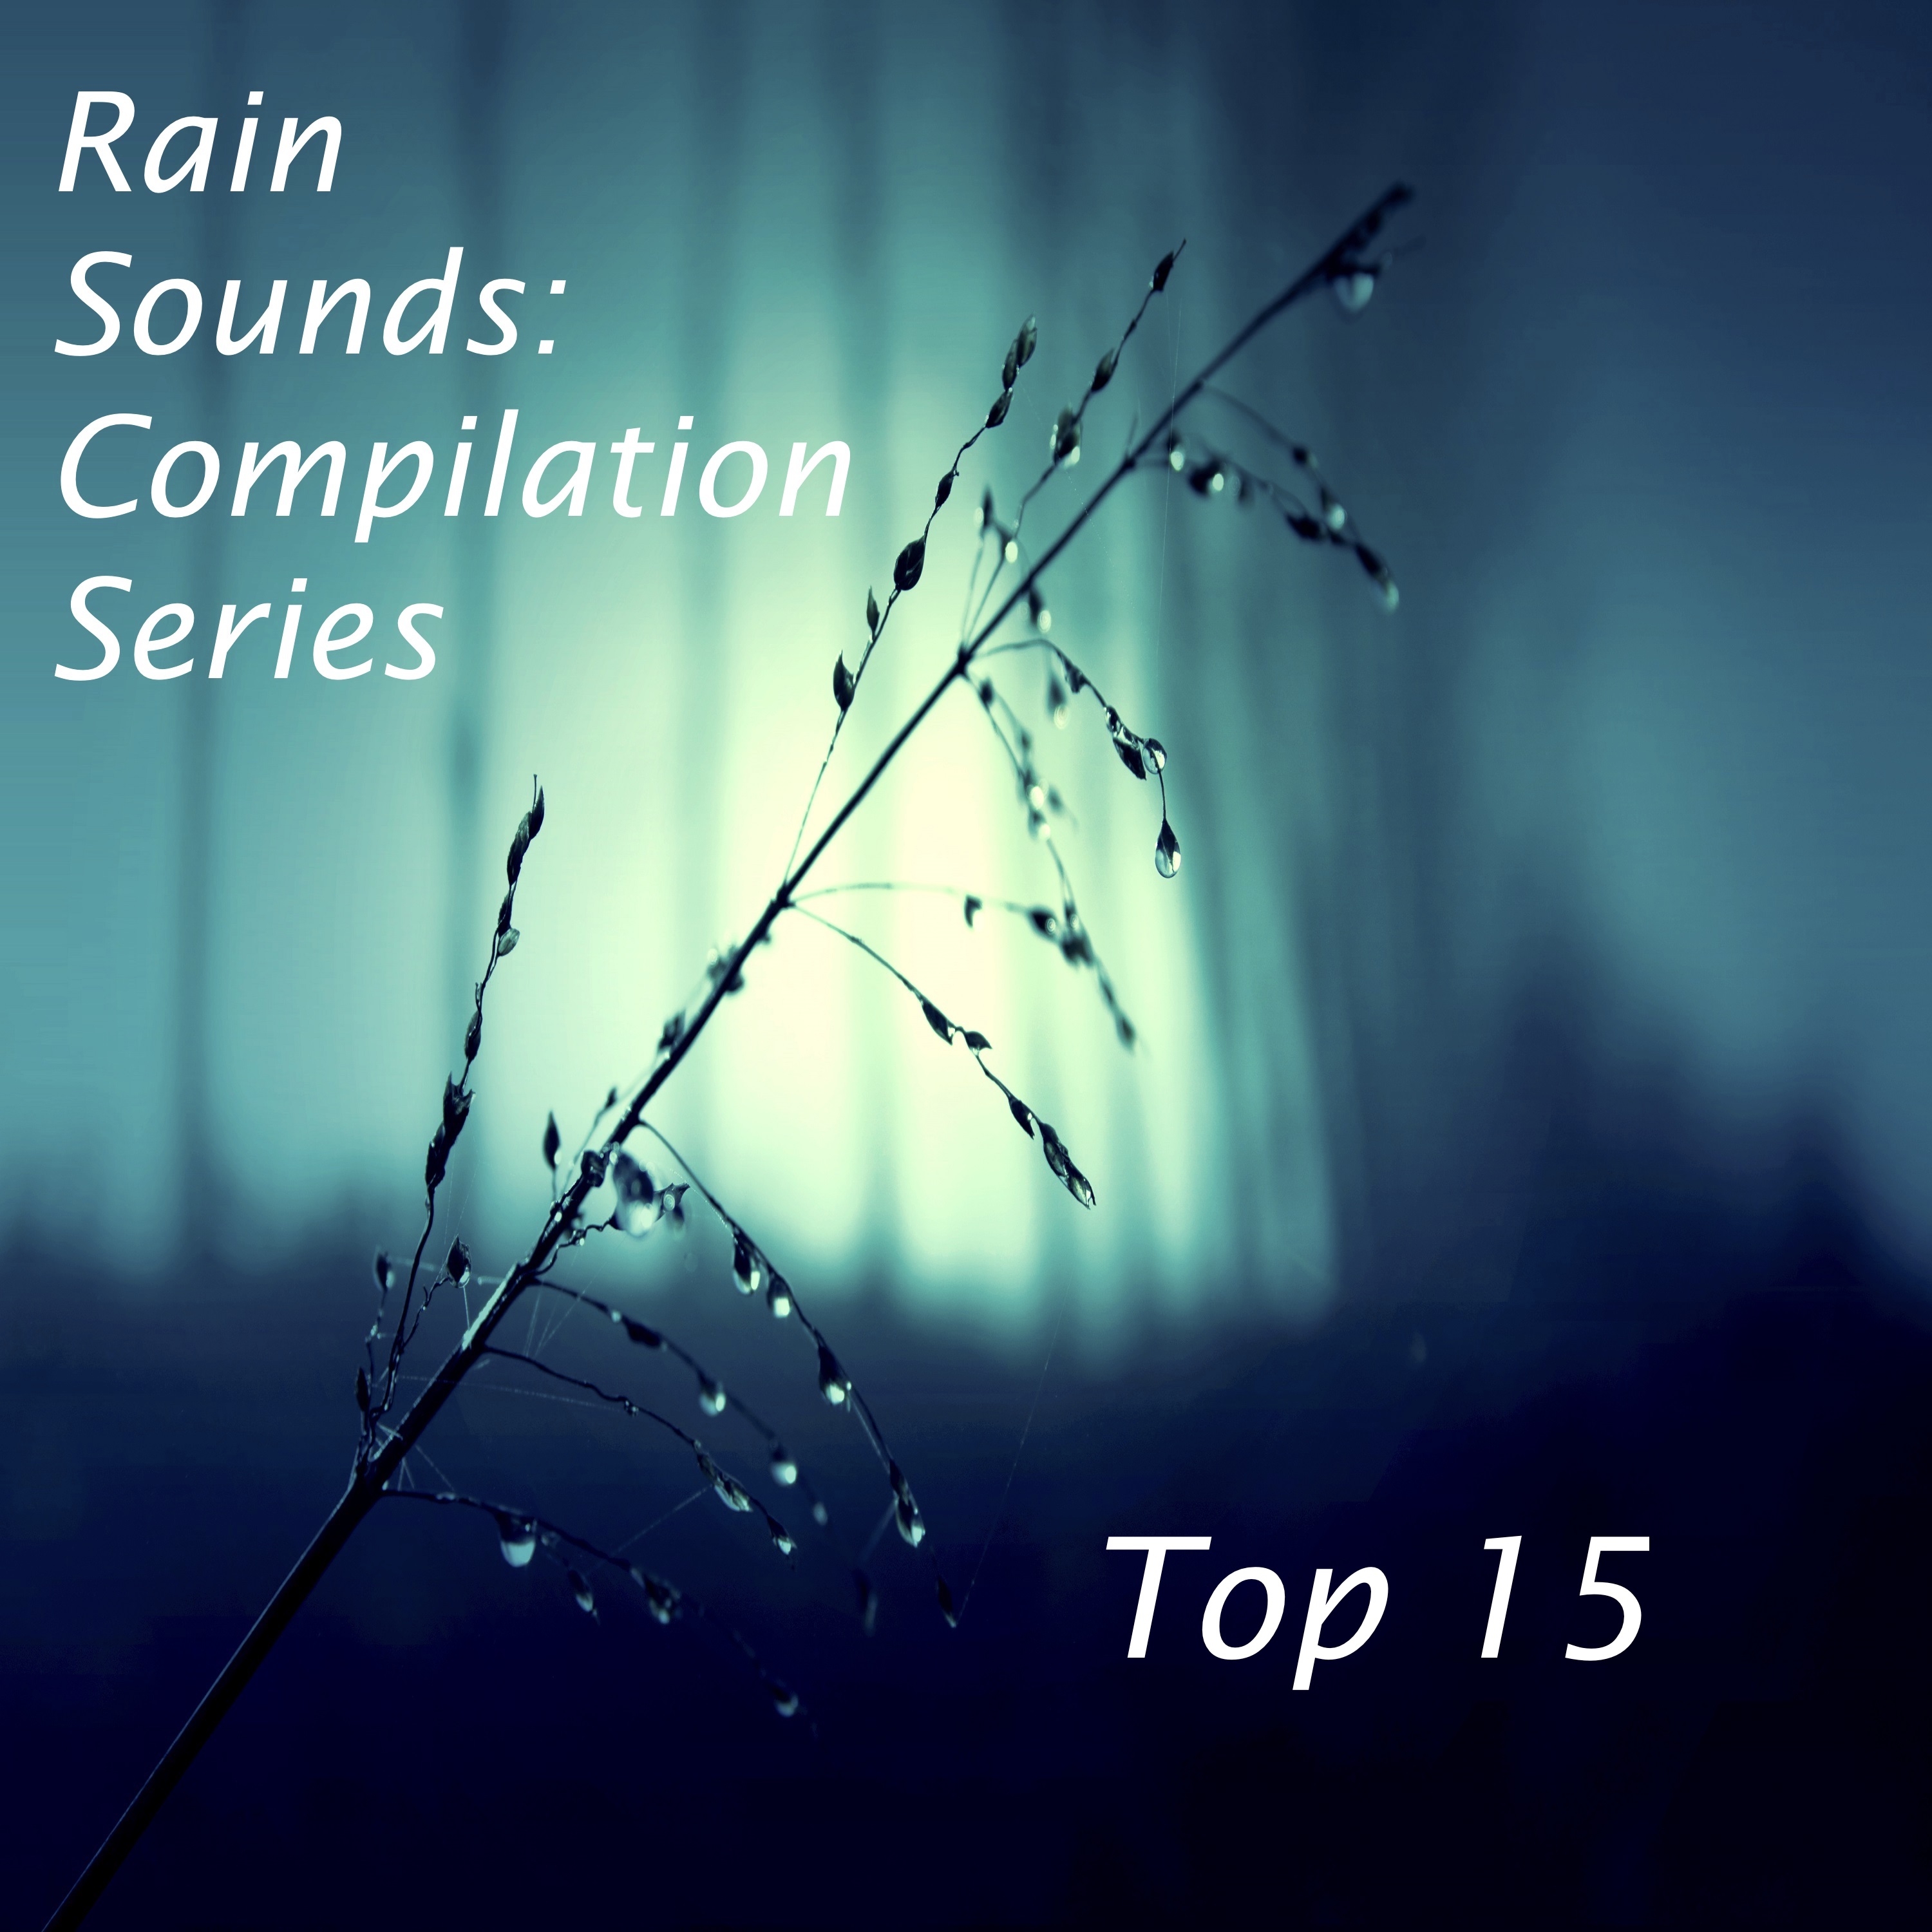 2017 Compilation: Top 15 Loopable Rain Sounds for Deep Sleep, Insomnia, Meditation and Relaxation